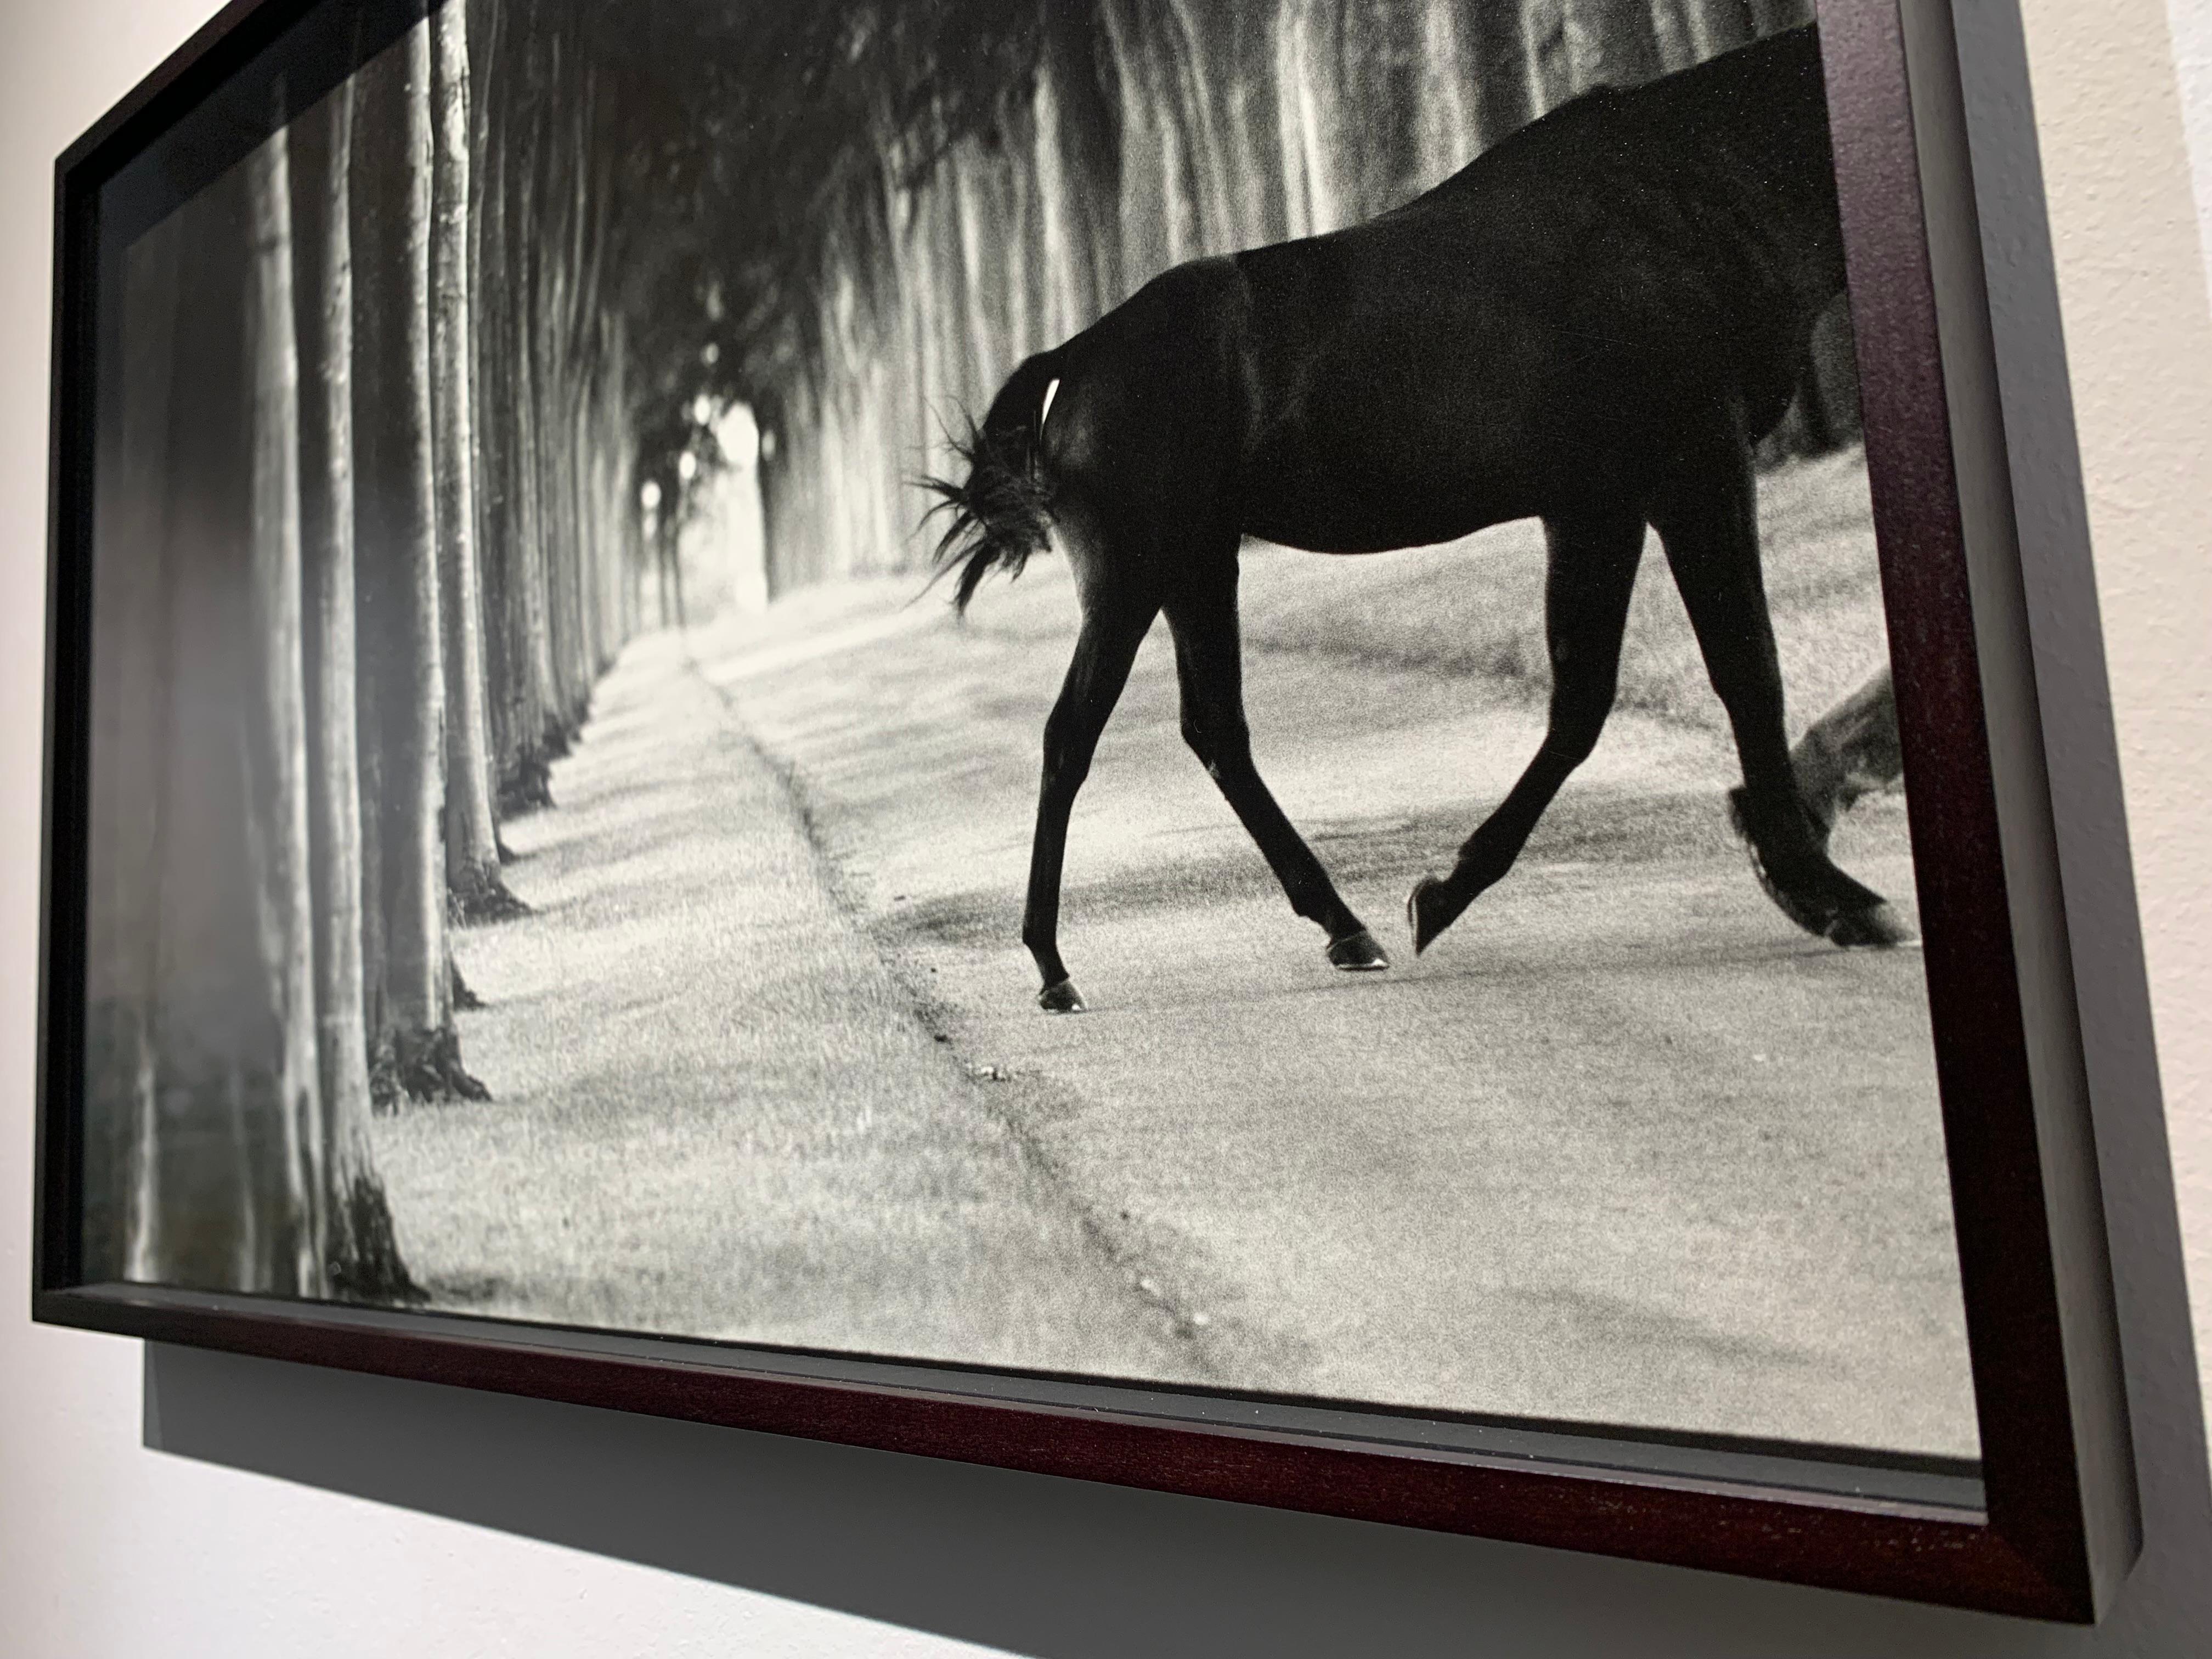 Kabool, ‘Avenue of Trees’, Horse Exit, Black and White landscape and a stallion For Sale 2